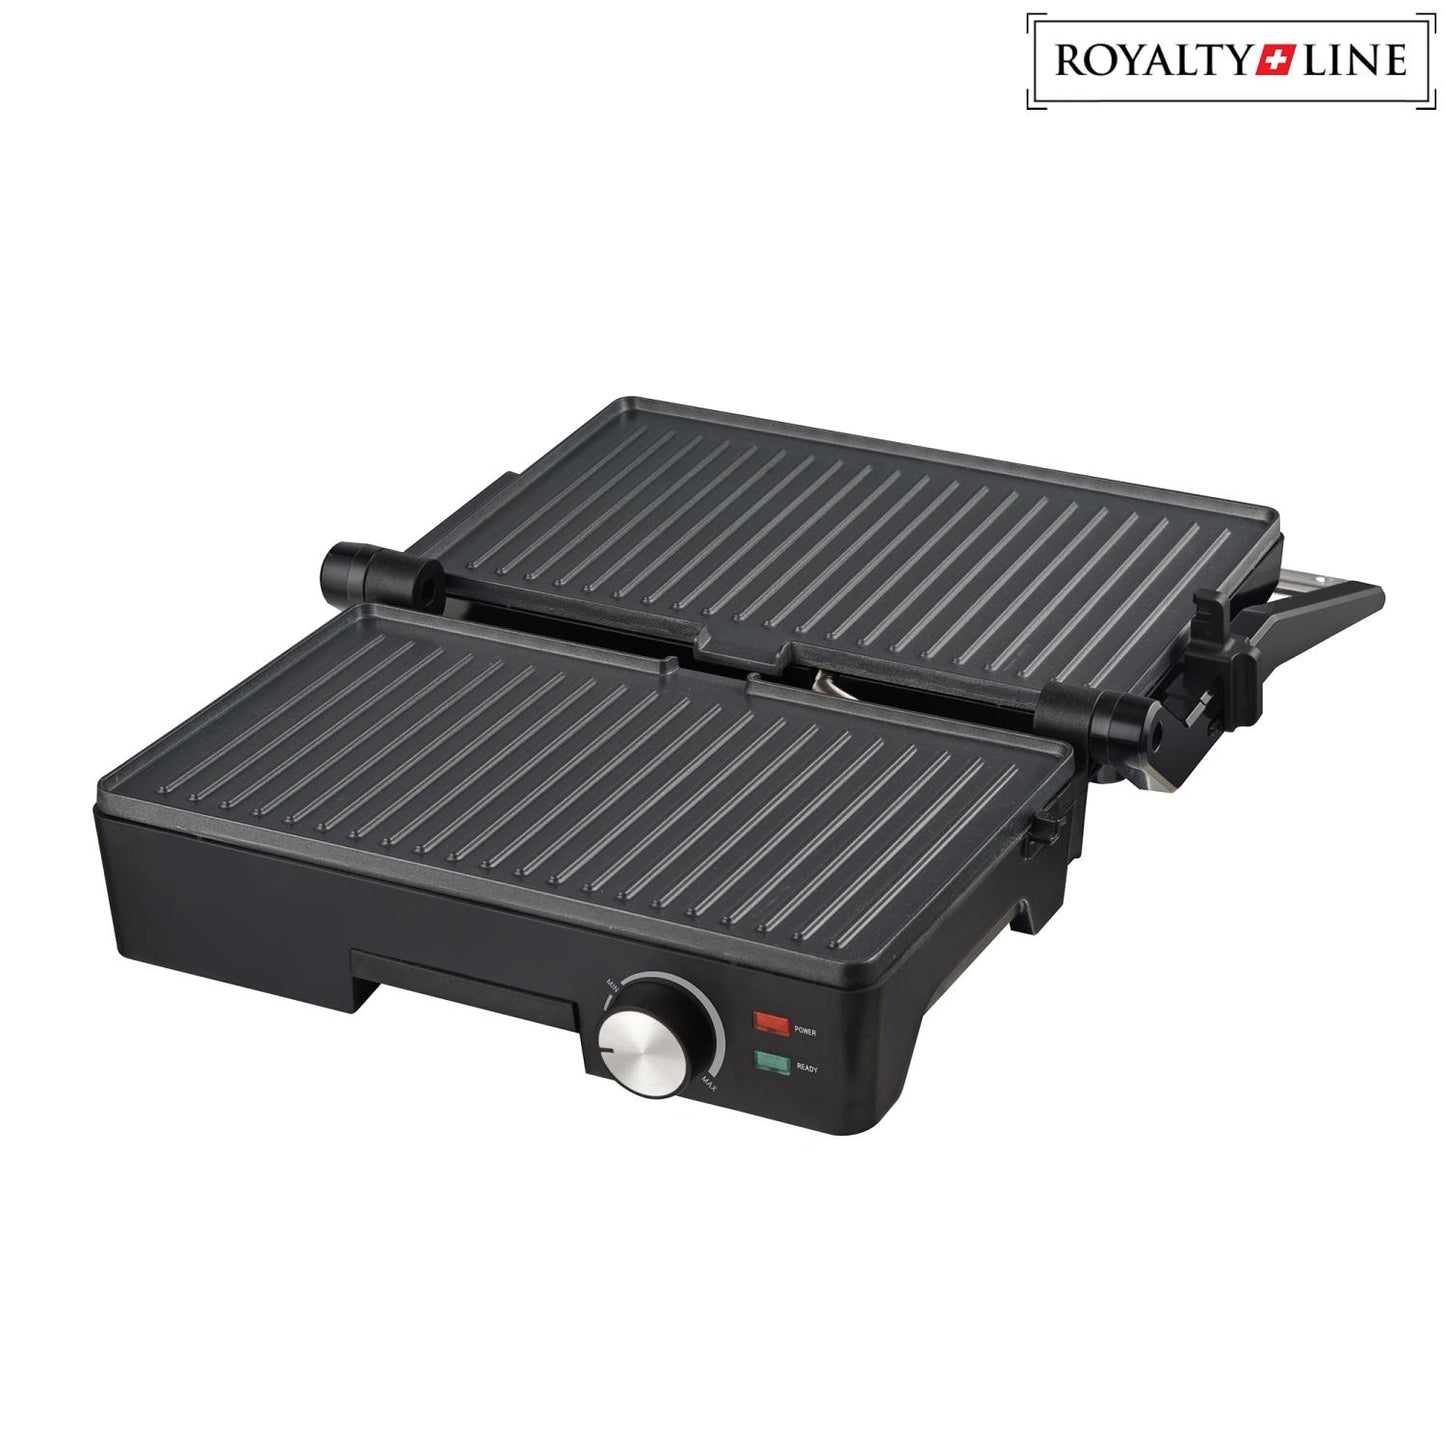 Royalty Line Black Toaster Grill 1600W